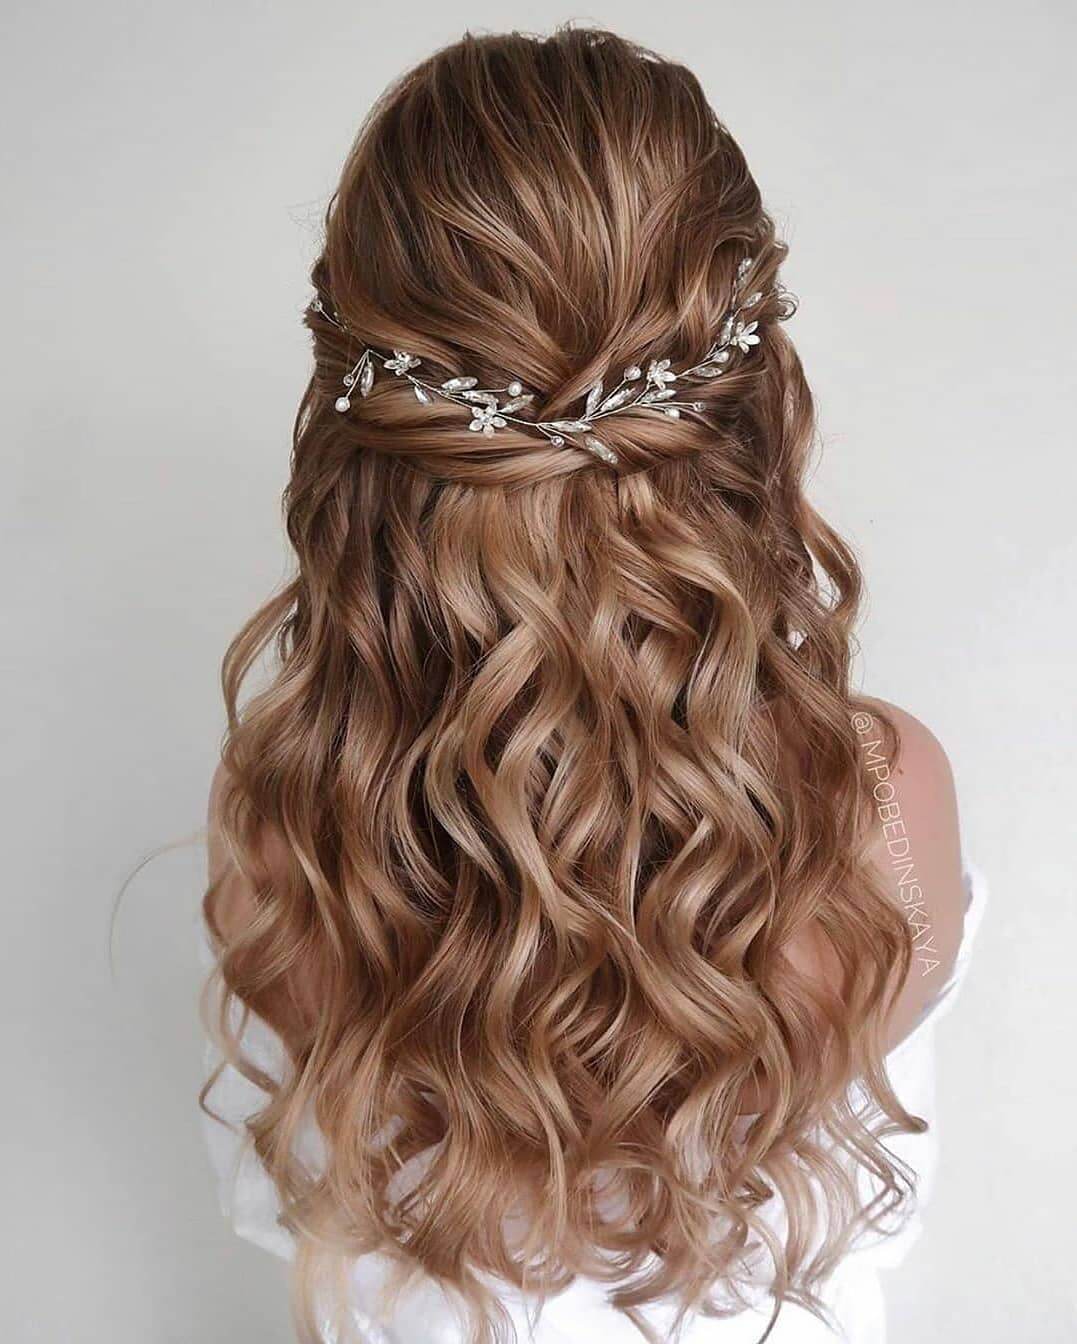 Elegant Open Hairstyle for Parties